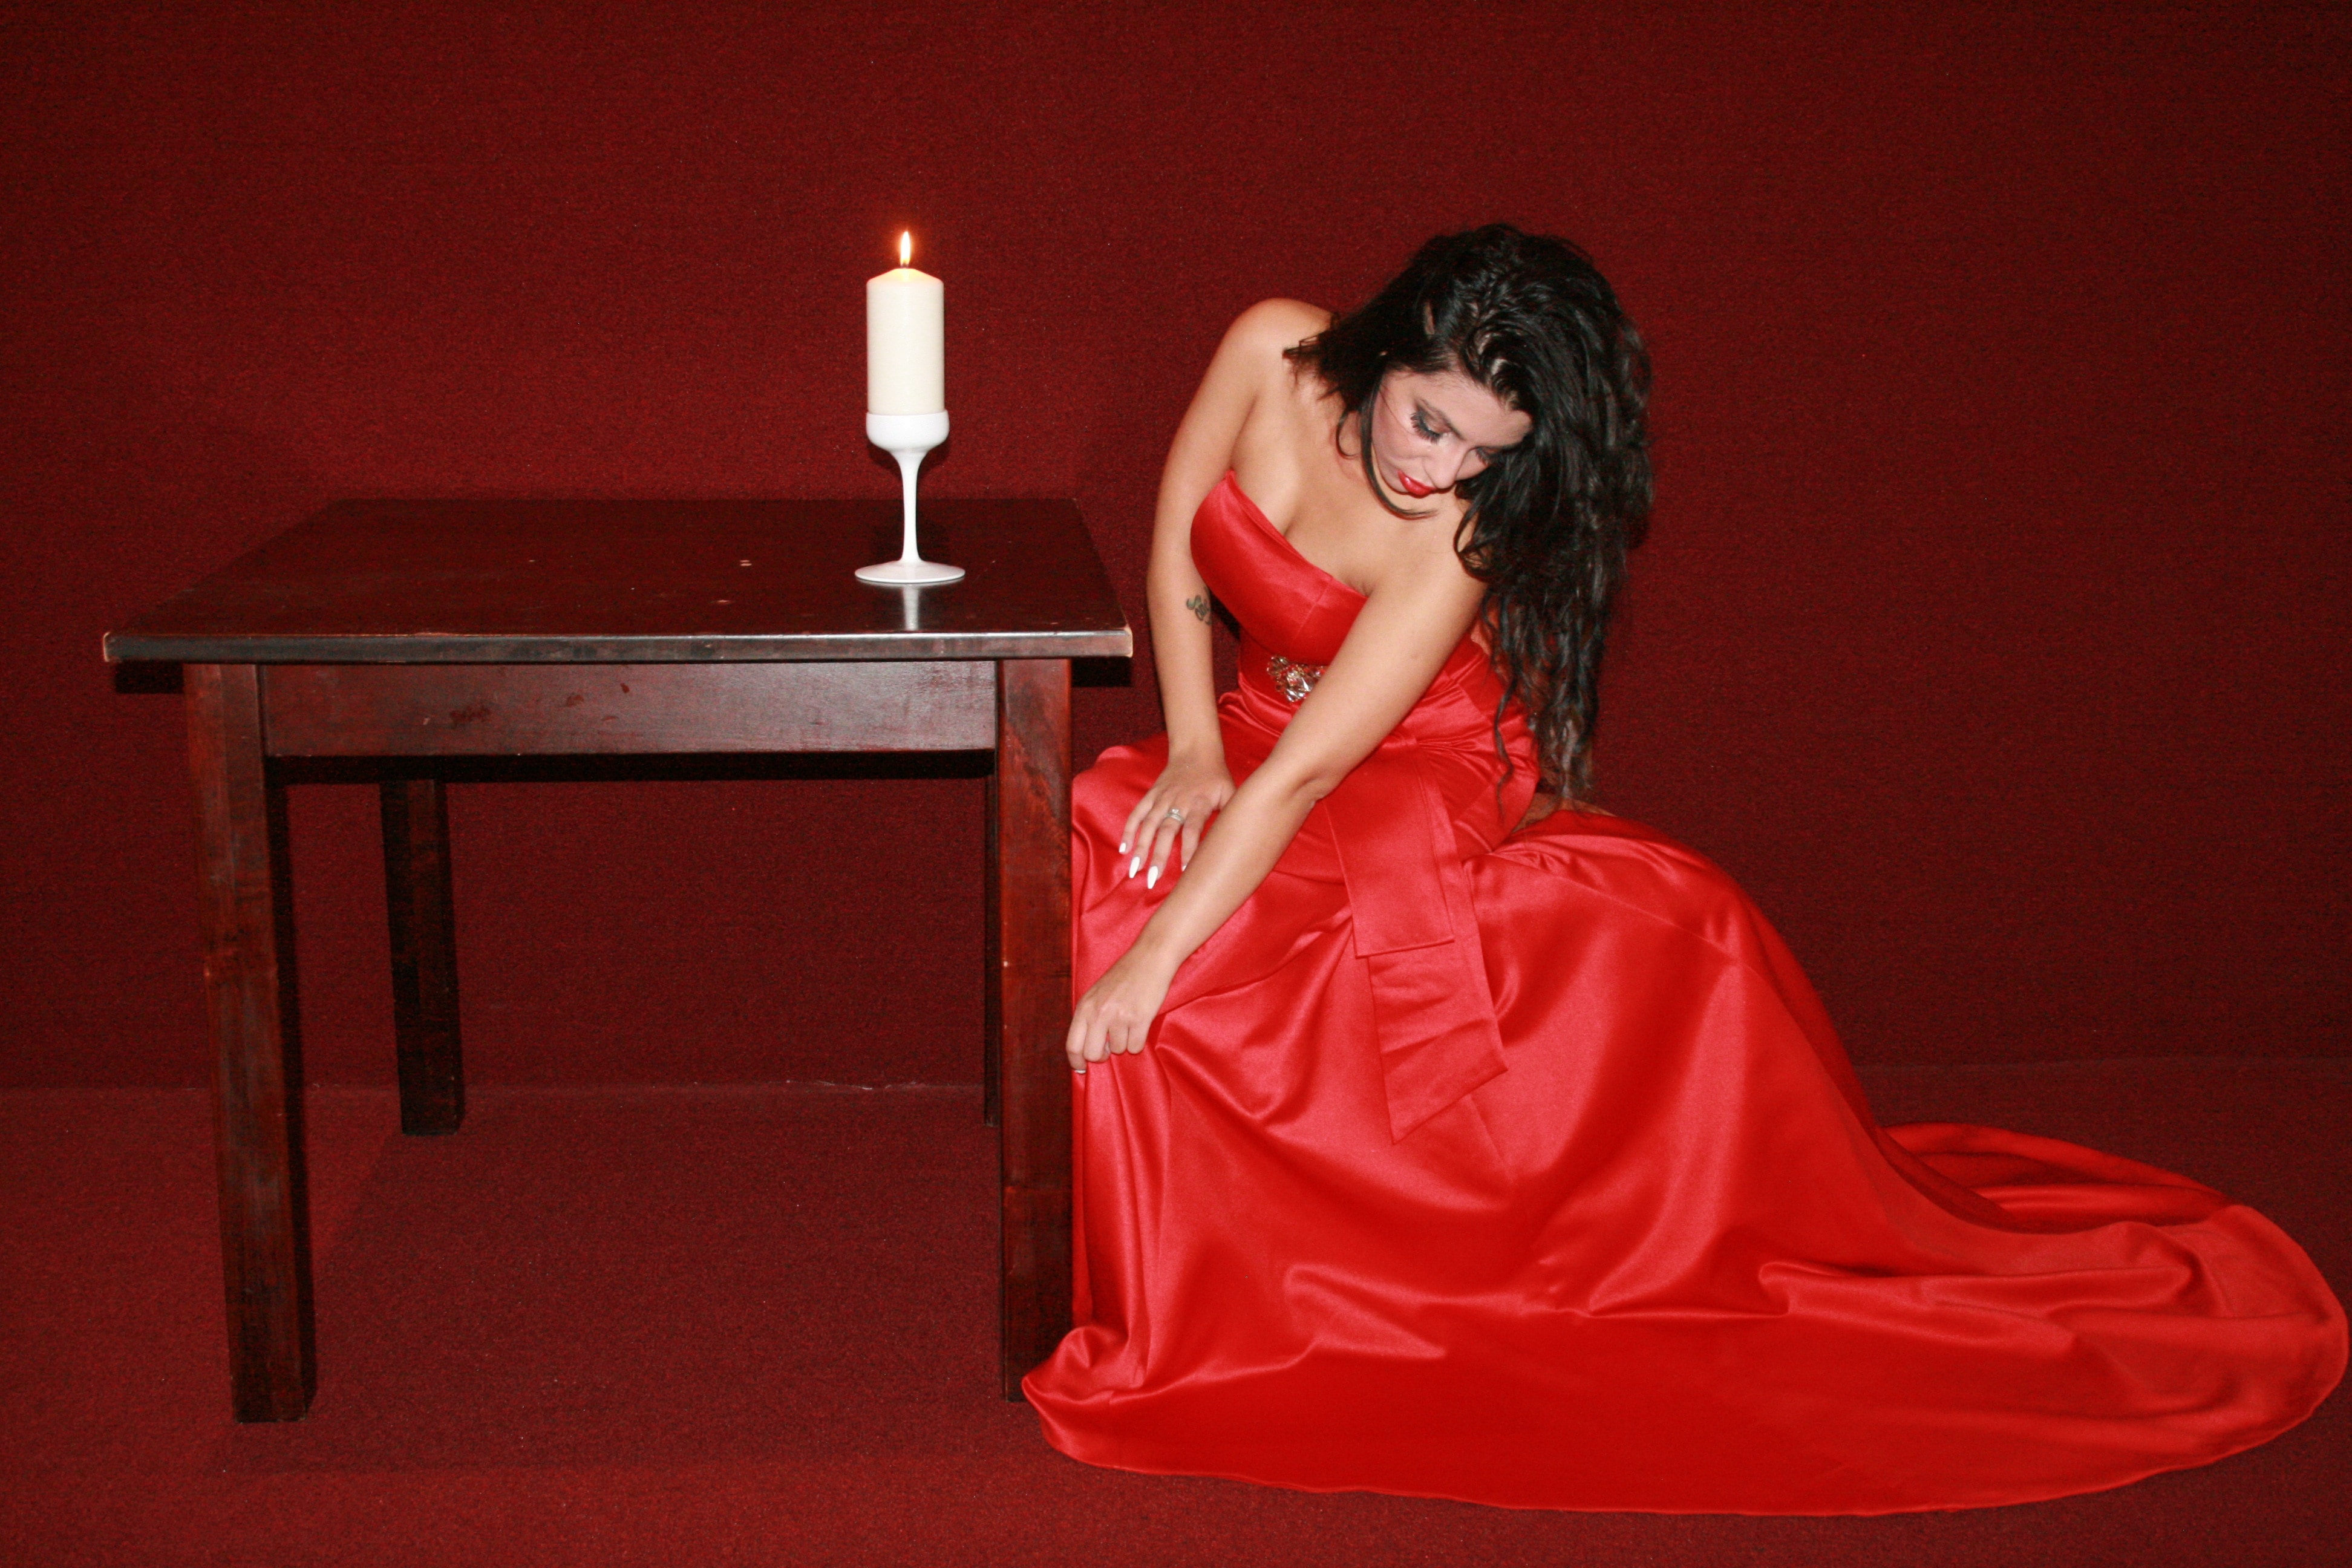 Dress, Lady In Red, Girl, Red, Table, red, dress